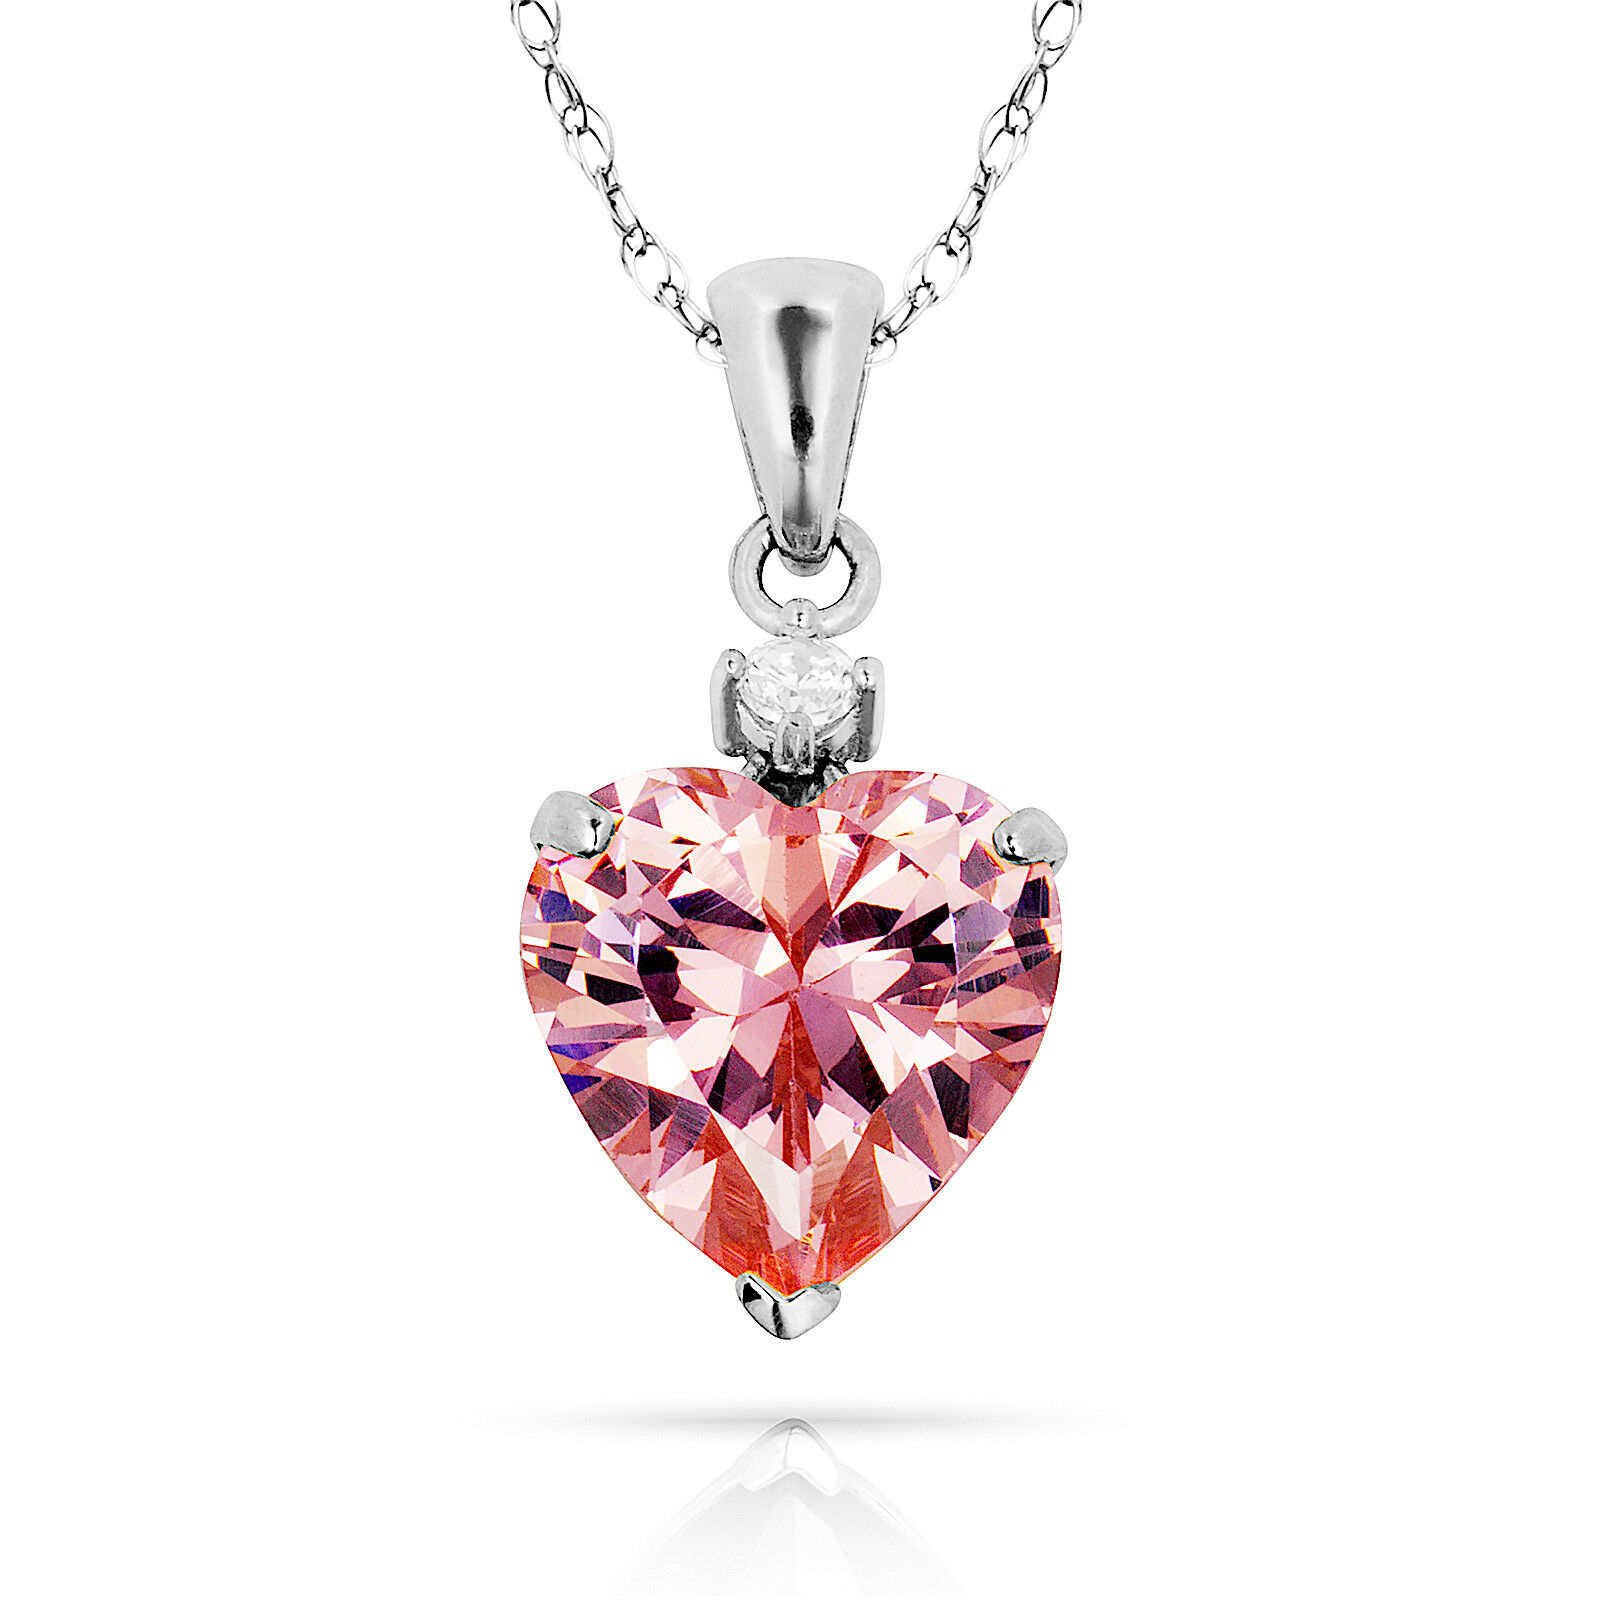 Primary image for 3.07Ct White & Pink Heart Sapphire Charm Pendant14K White Gold w/Chain